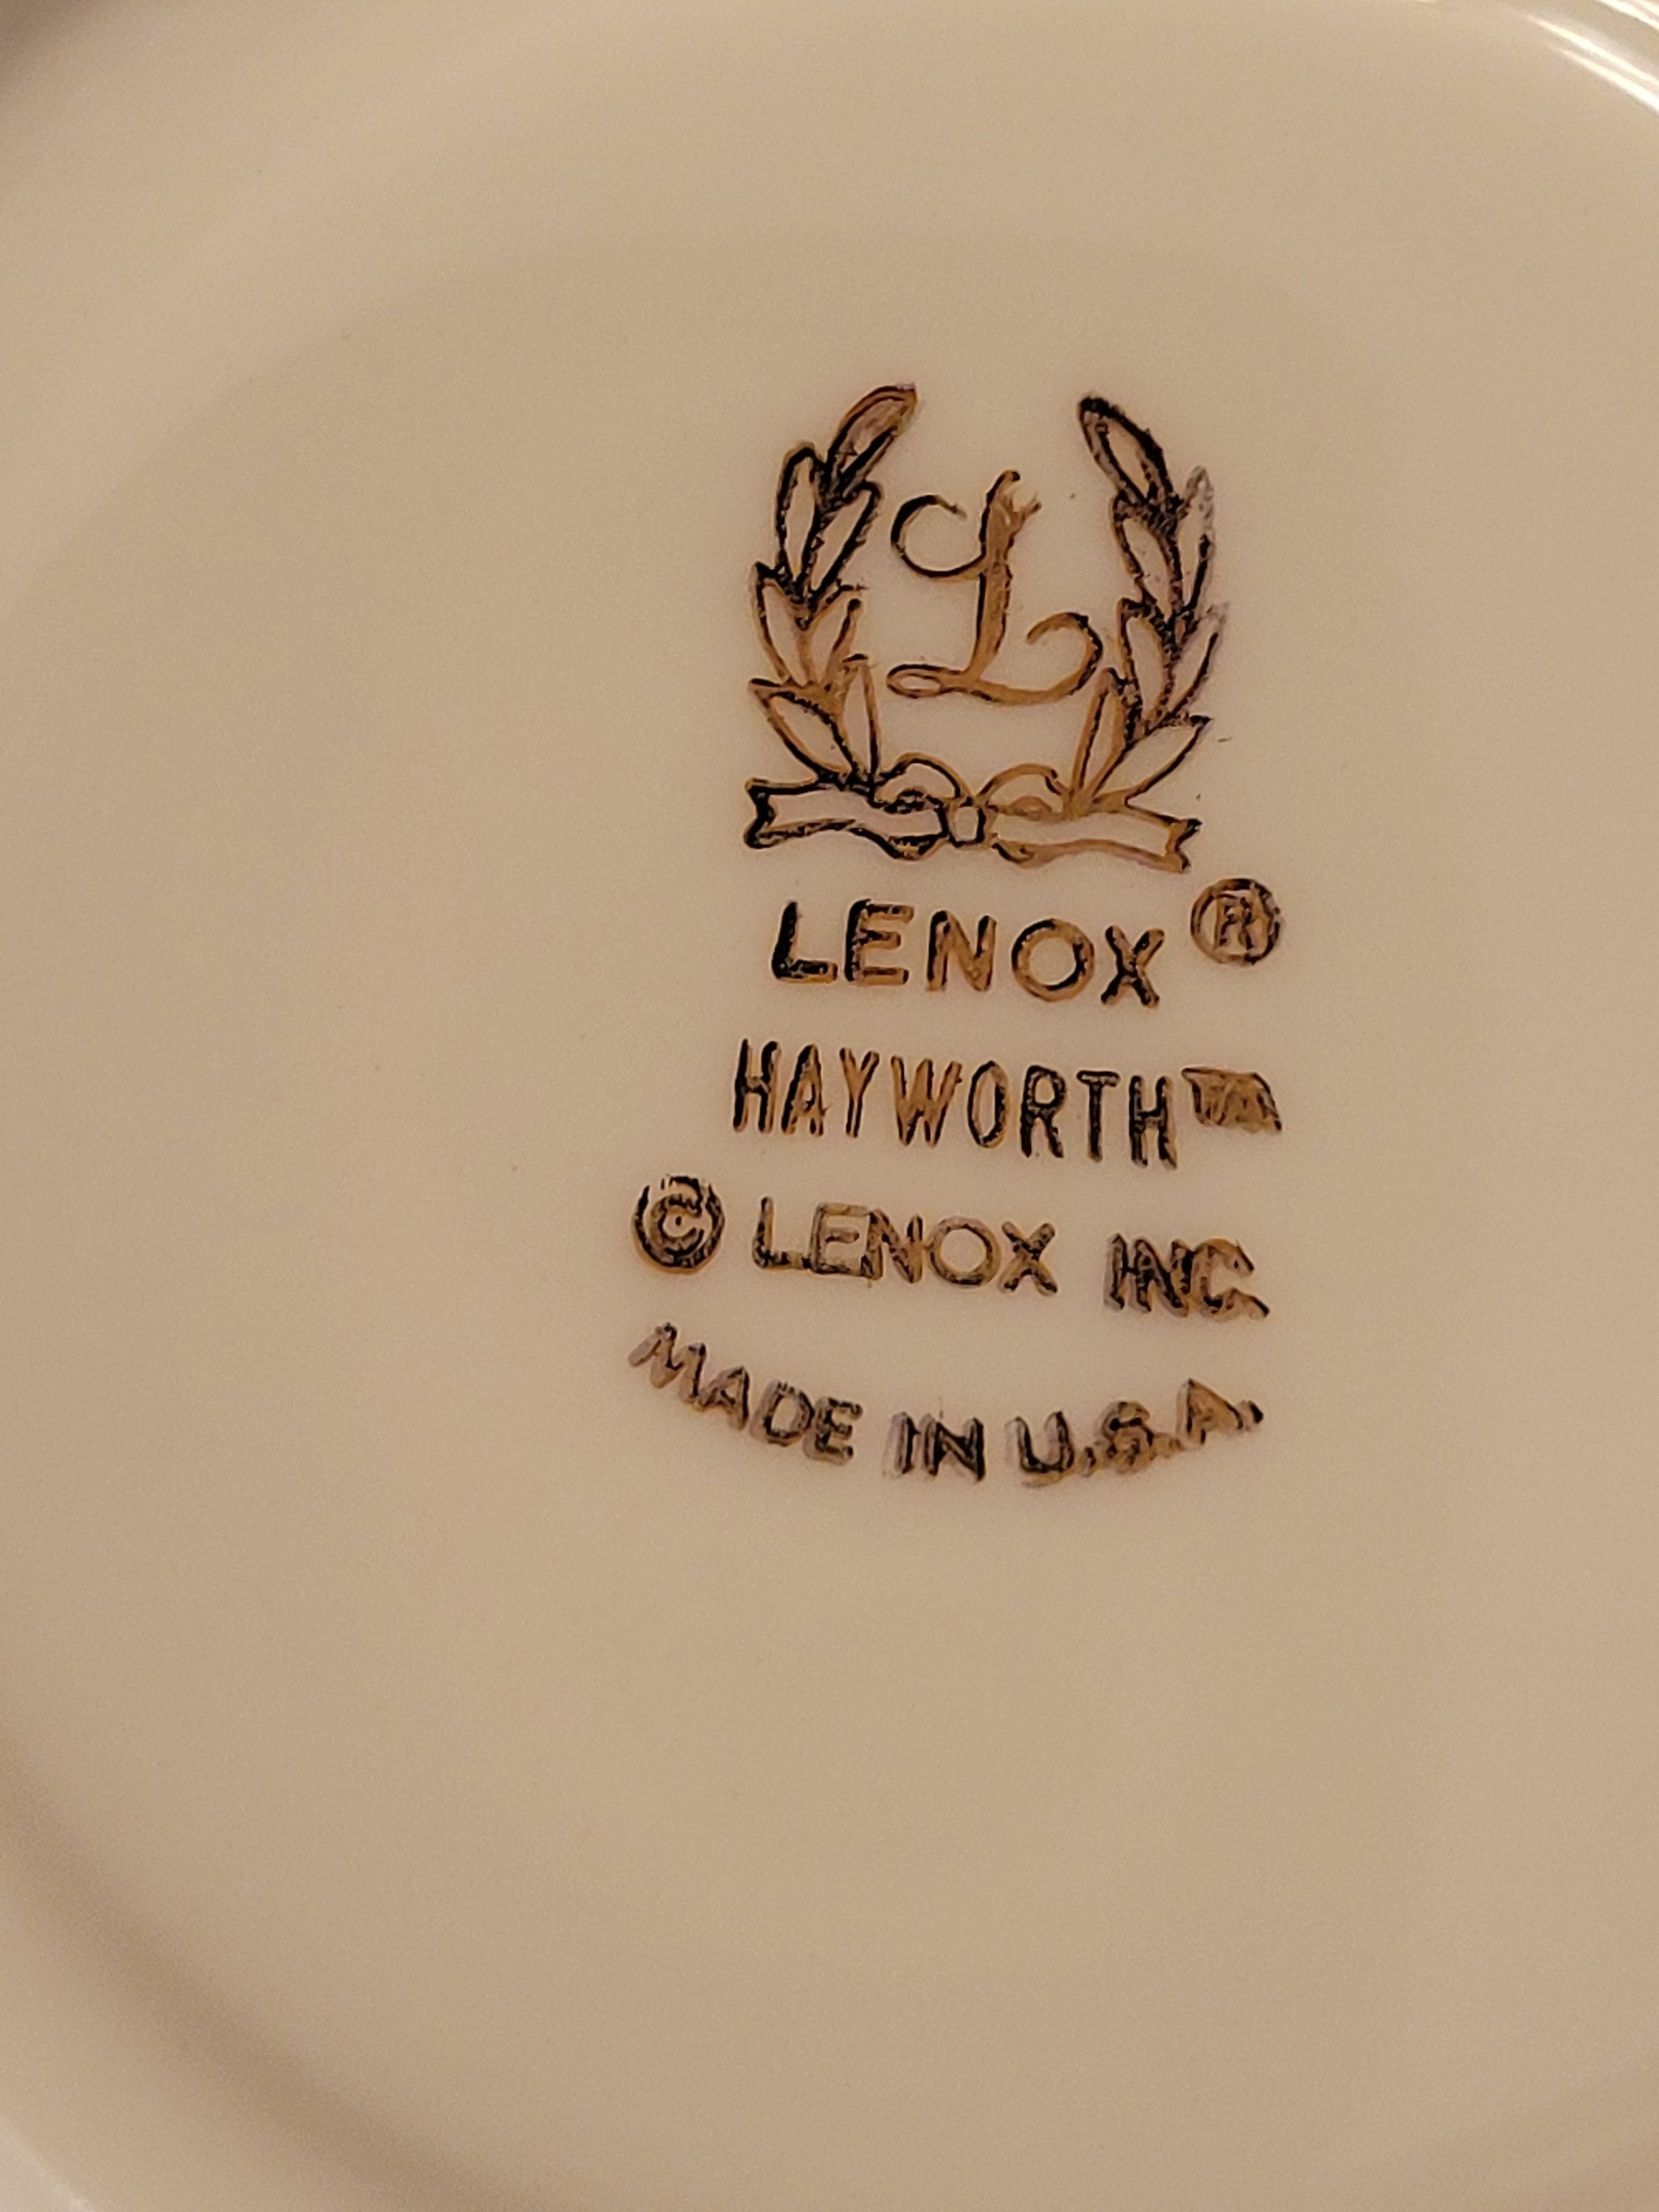 Lenox hayworth Set of 4 Cups and Saucers - Etsy